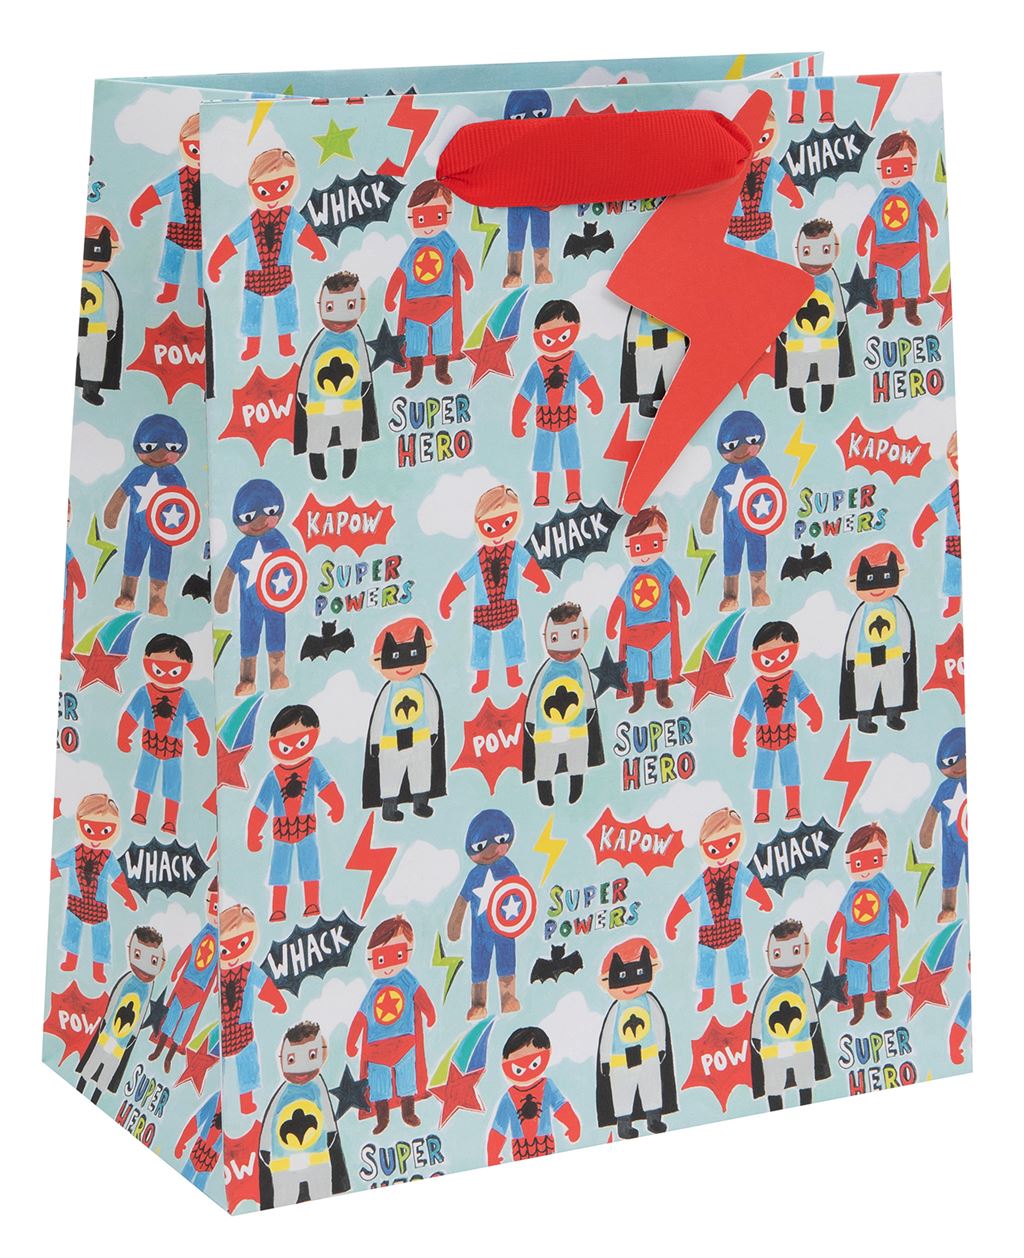 A gift bag with a light blue background covered in superhero illustrations. Little boys are dressed as Captain America, Batman and Spiderman feature. There are also embellishments in the background of white clouds, red thunderbolts and phrases such as 'whack', 'pow' and 'kapow'. There is also a red ribbon handle with a red thunderbolt gift tag.